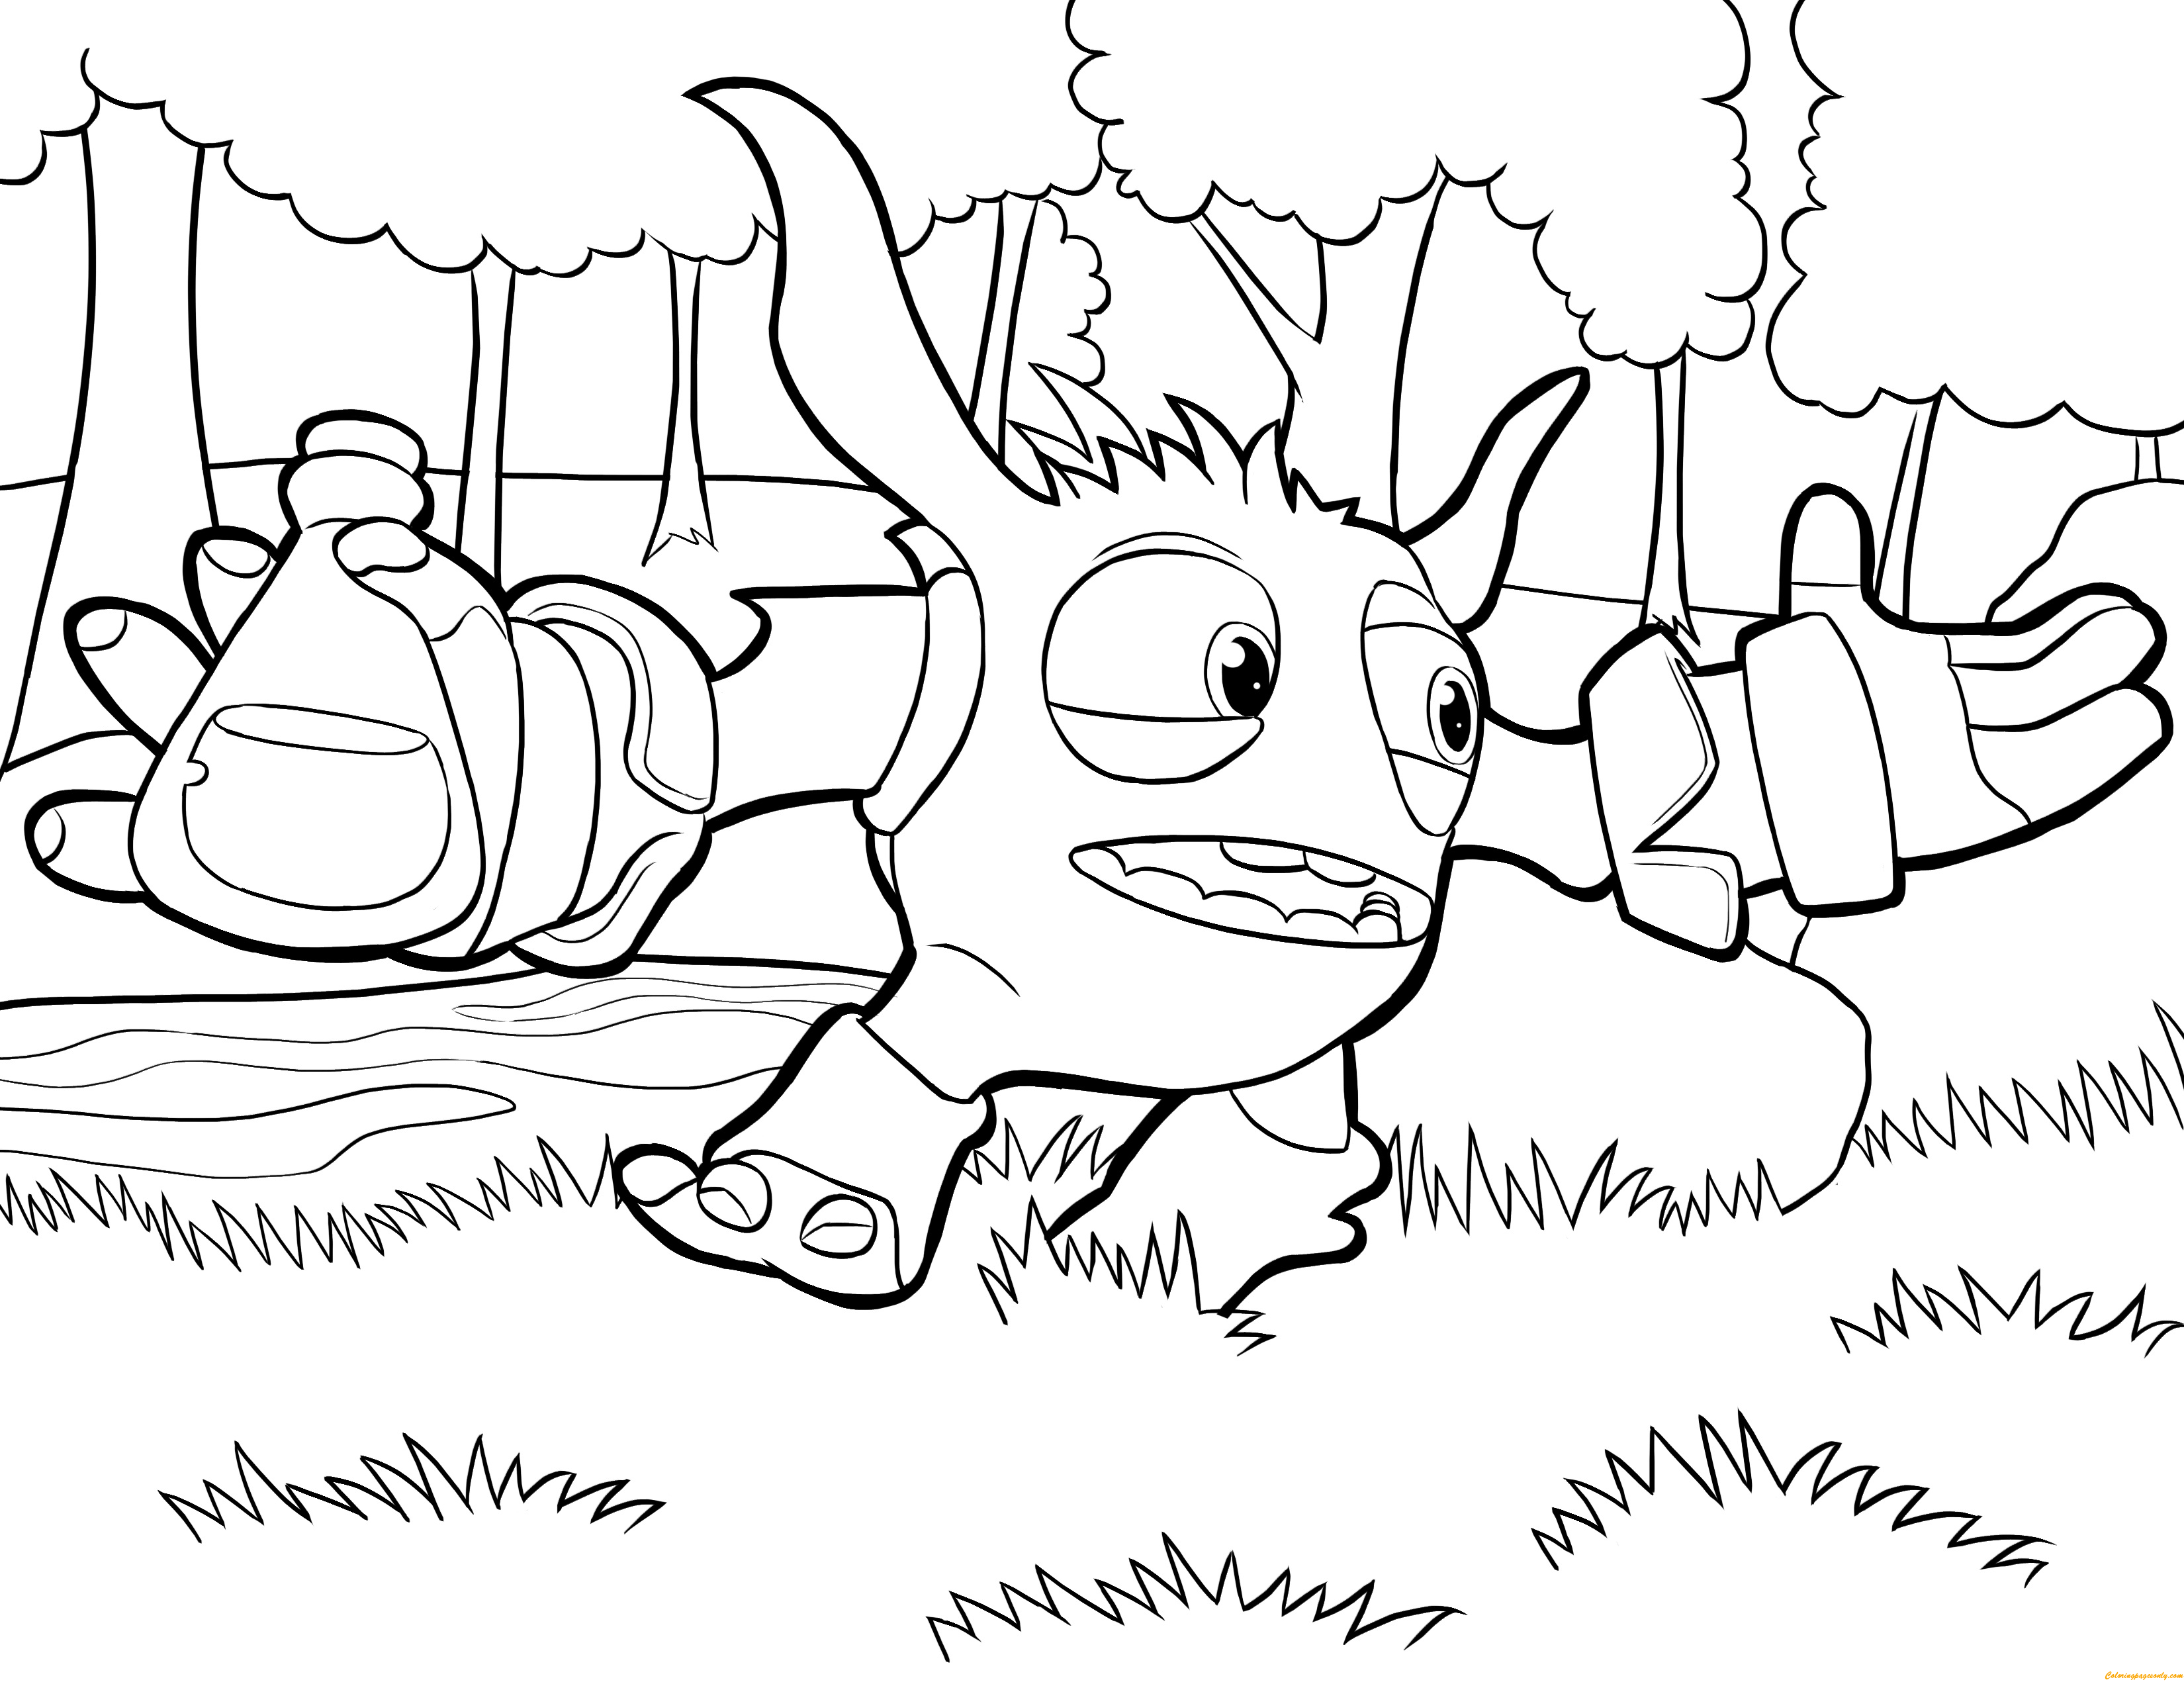 Pop Fizz Skylanders Coloring Page - Free Coloring Pages Online